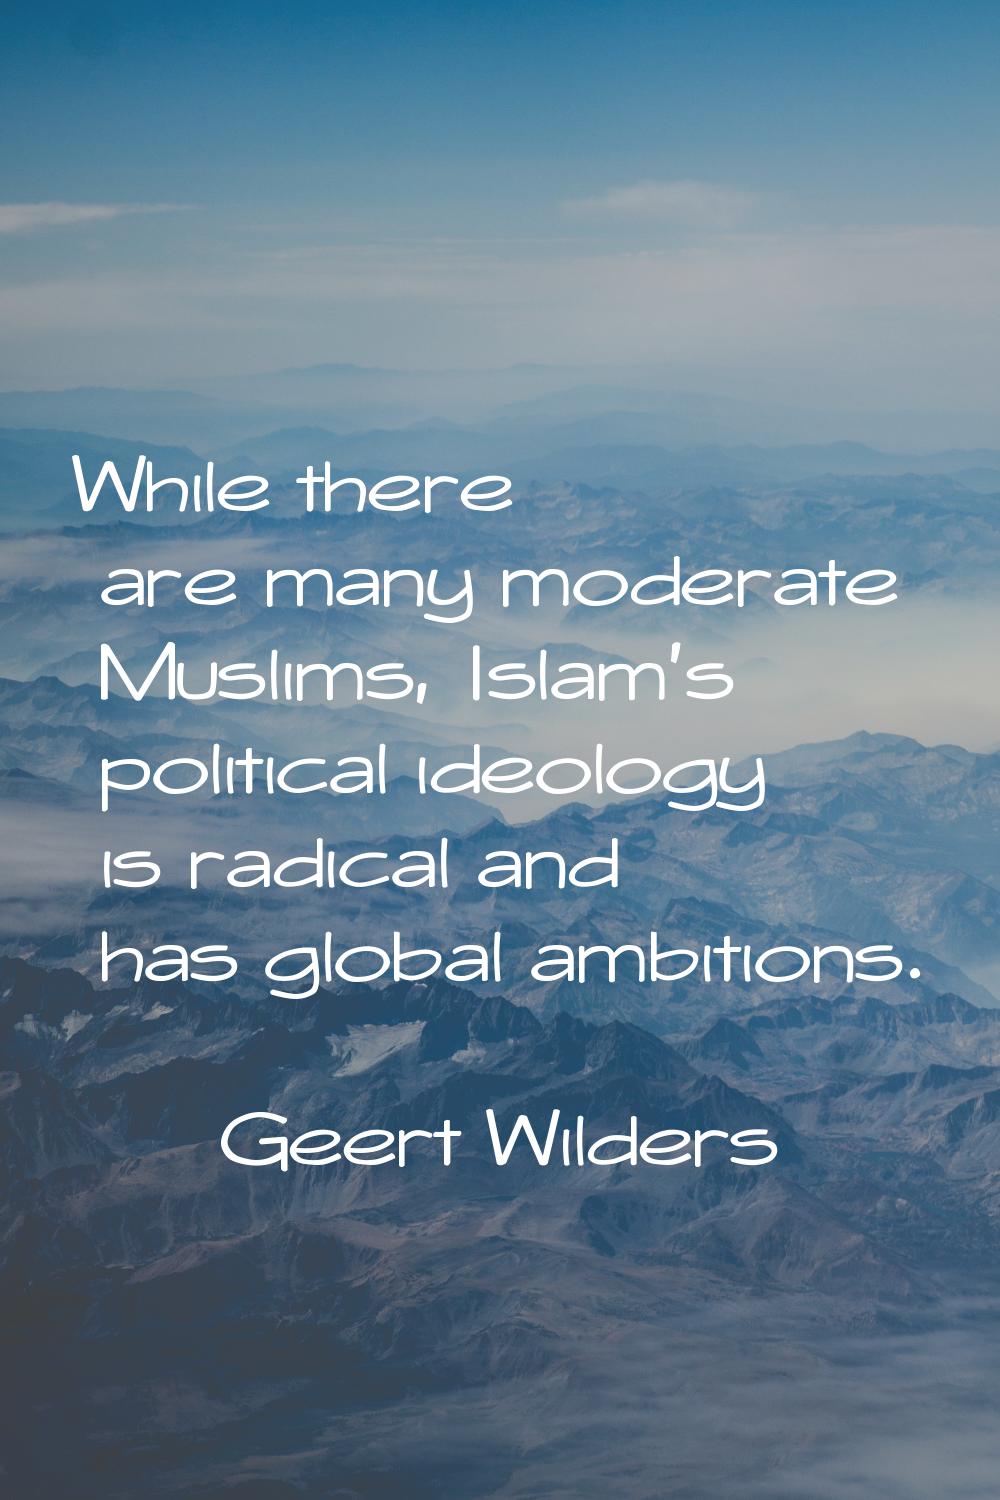 While there are many moderate Muslims, Islam's political ideology is radical and has global ambitio